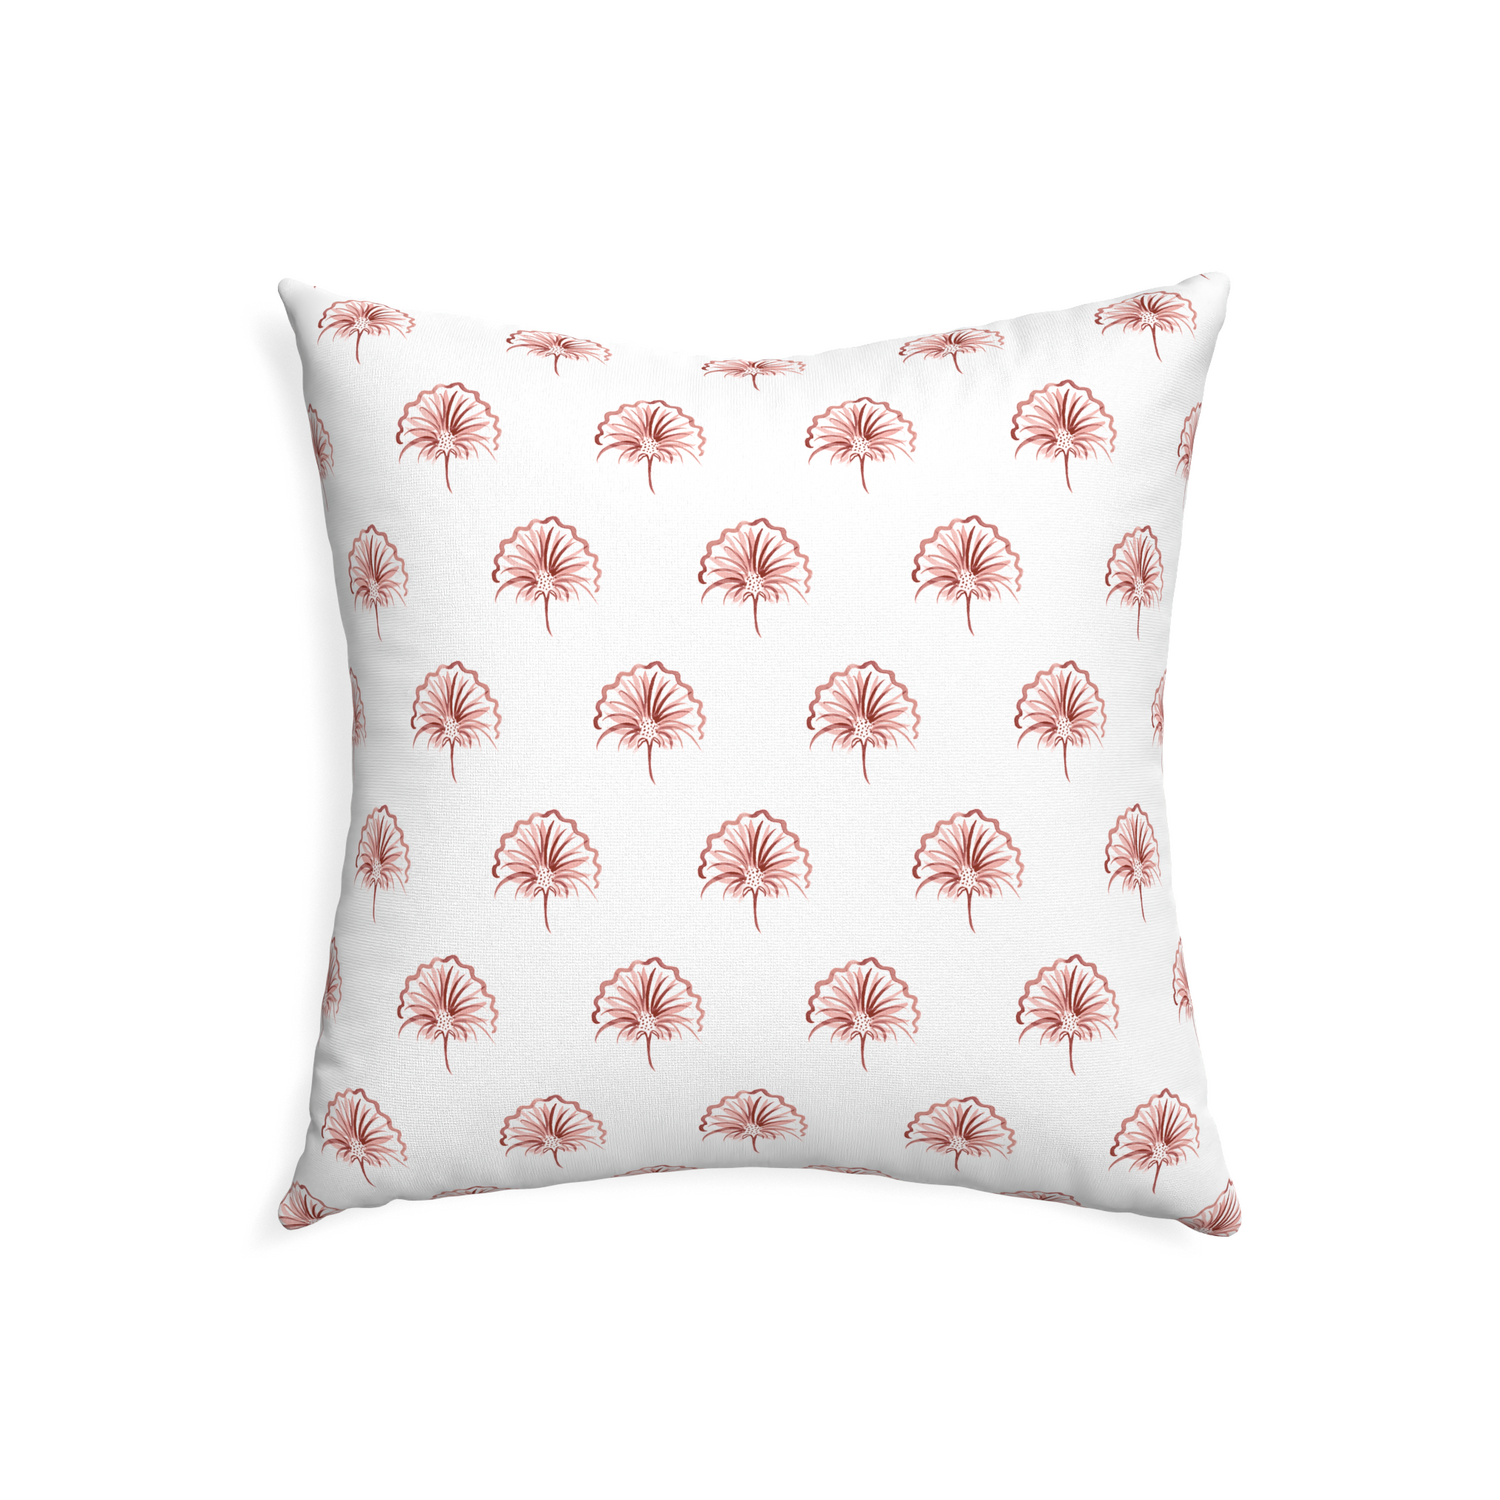 22-square penelope rose custom floral pinkpillow with none on white background